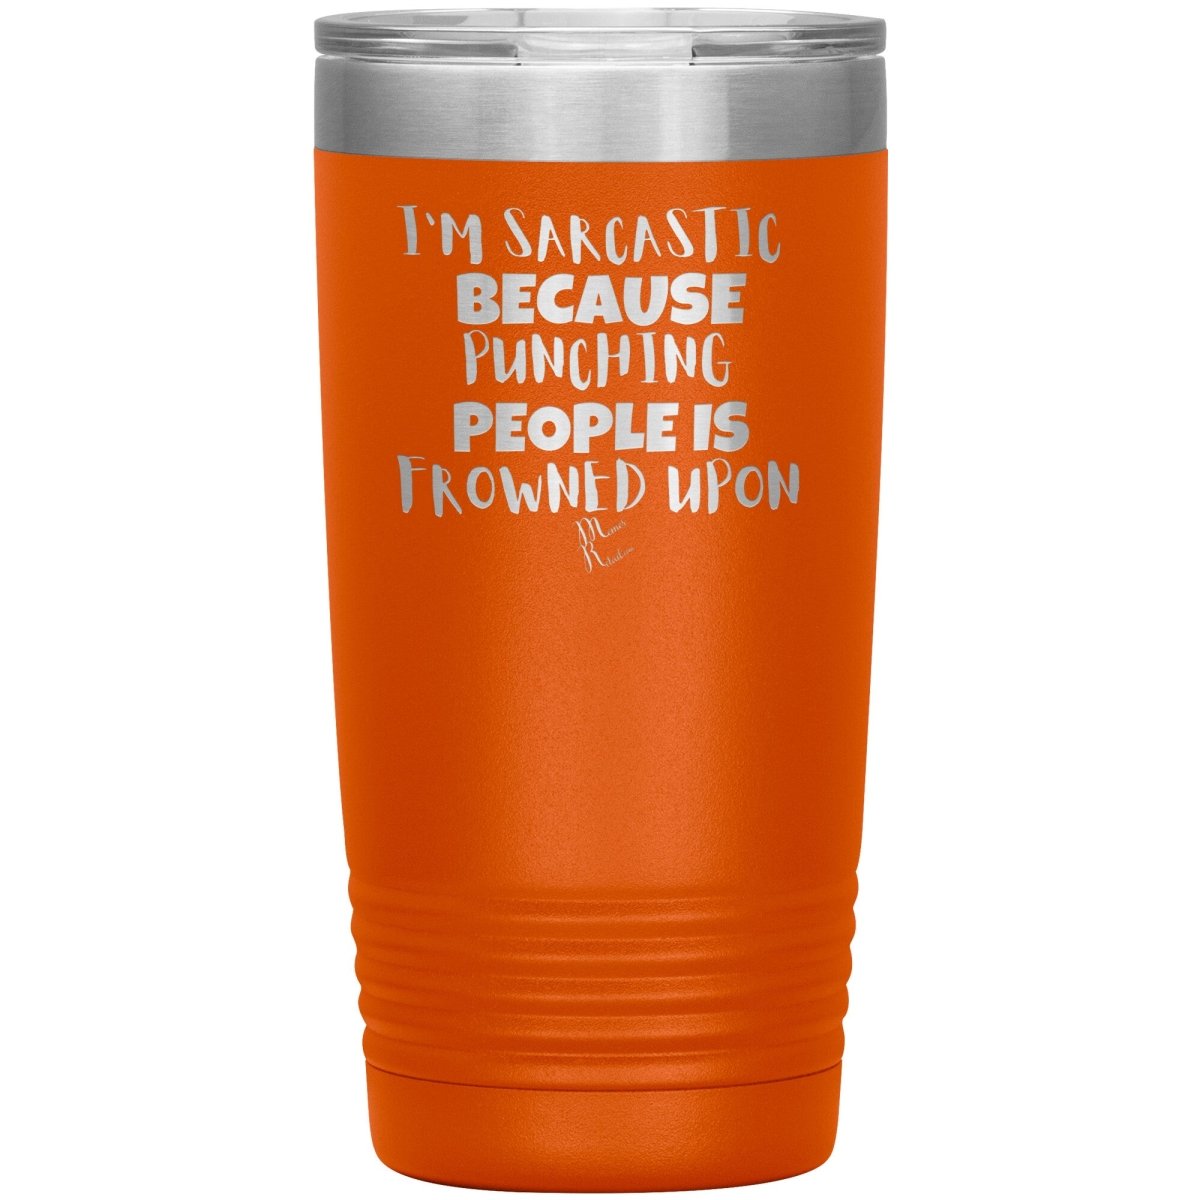 I'm Sarcastic Because Punching People is Frowned Upon Tumblers, 20oz Insulated Tumbler / Orange - MemesRetail.com